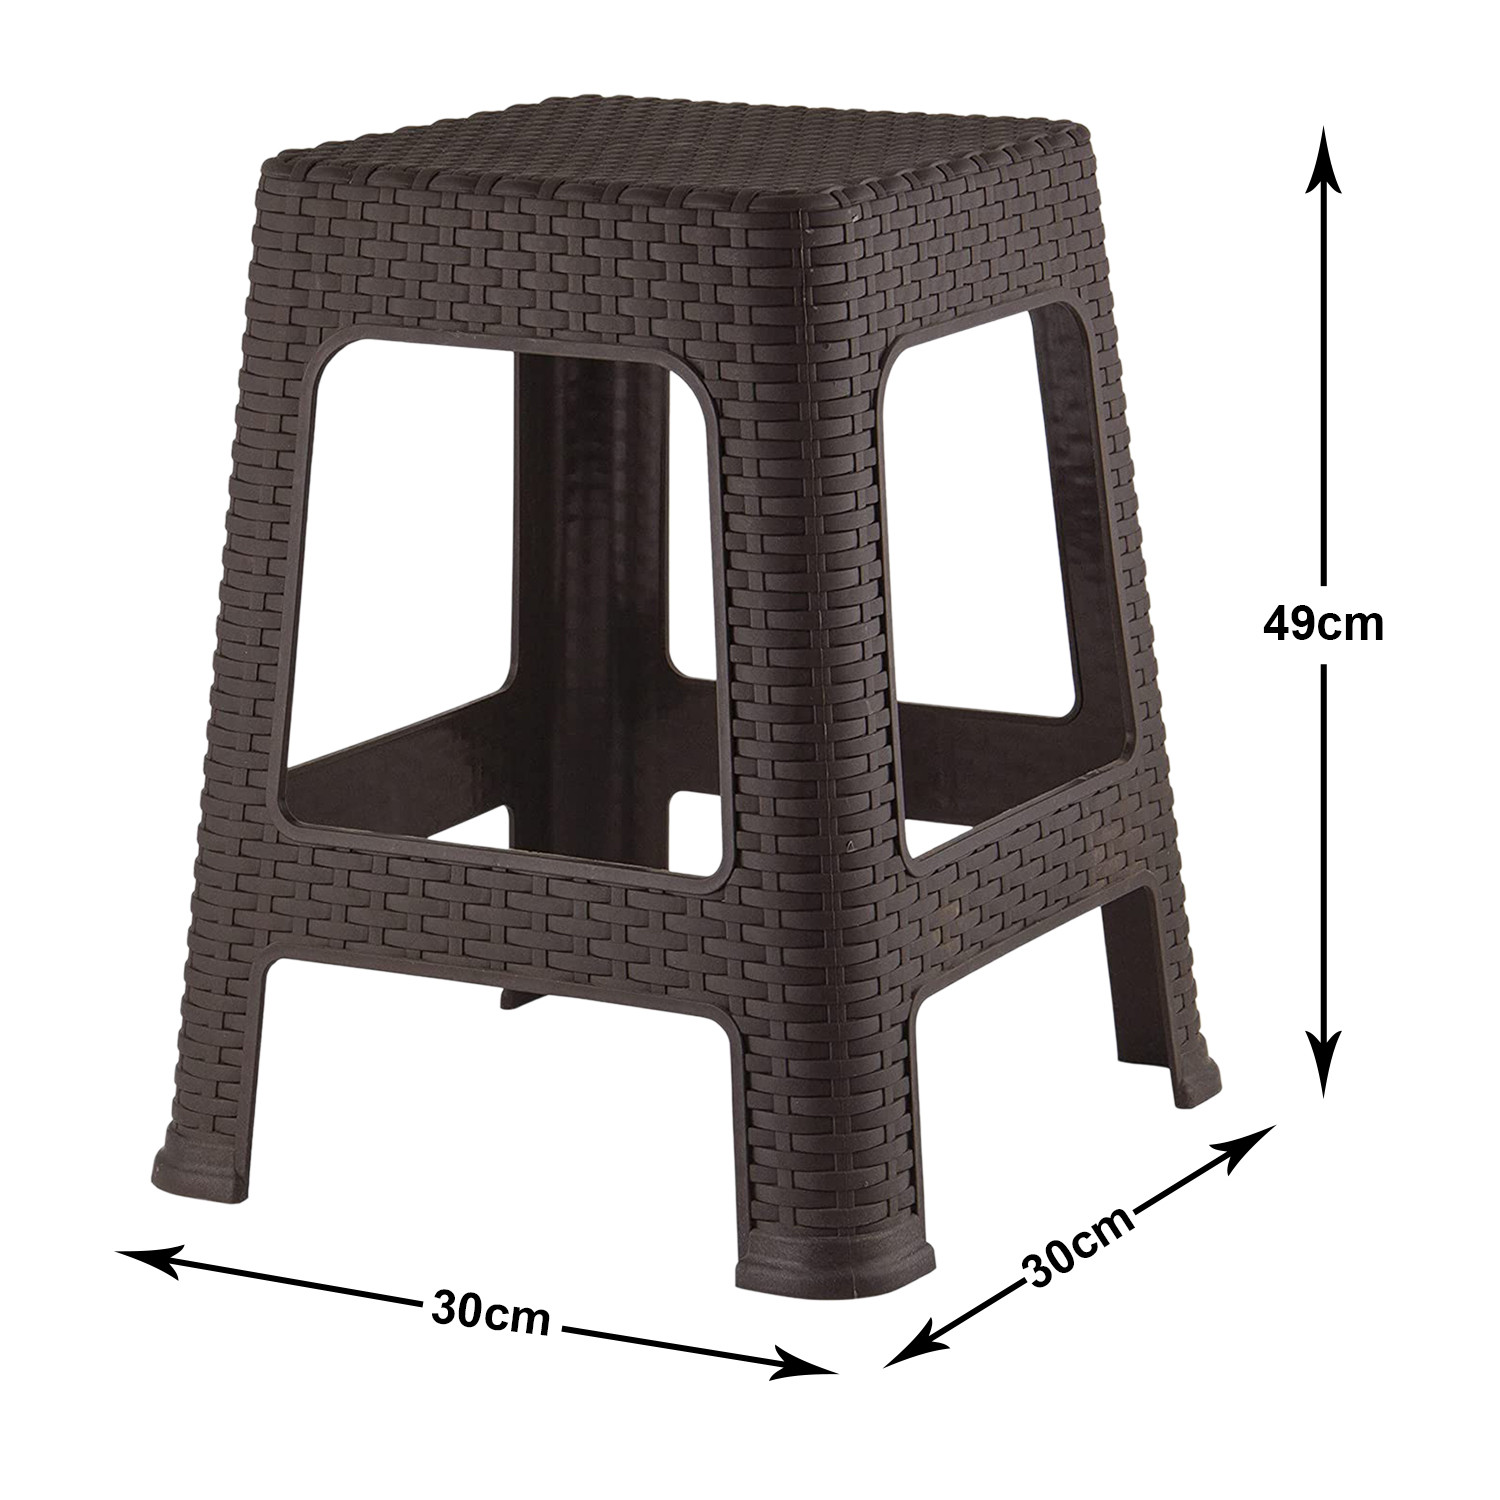 Kuber Industries Multiuses Strong, Durable, Lightweight Plastic Sitting Stool for Indoor/Outdoor Use (Brown)-46KM0519